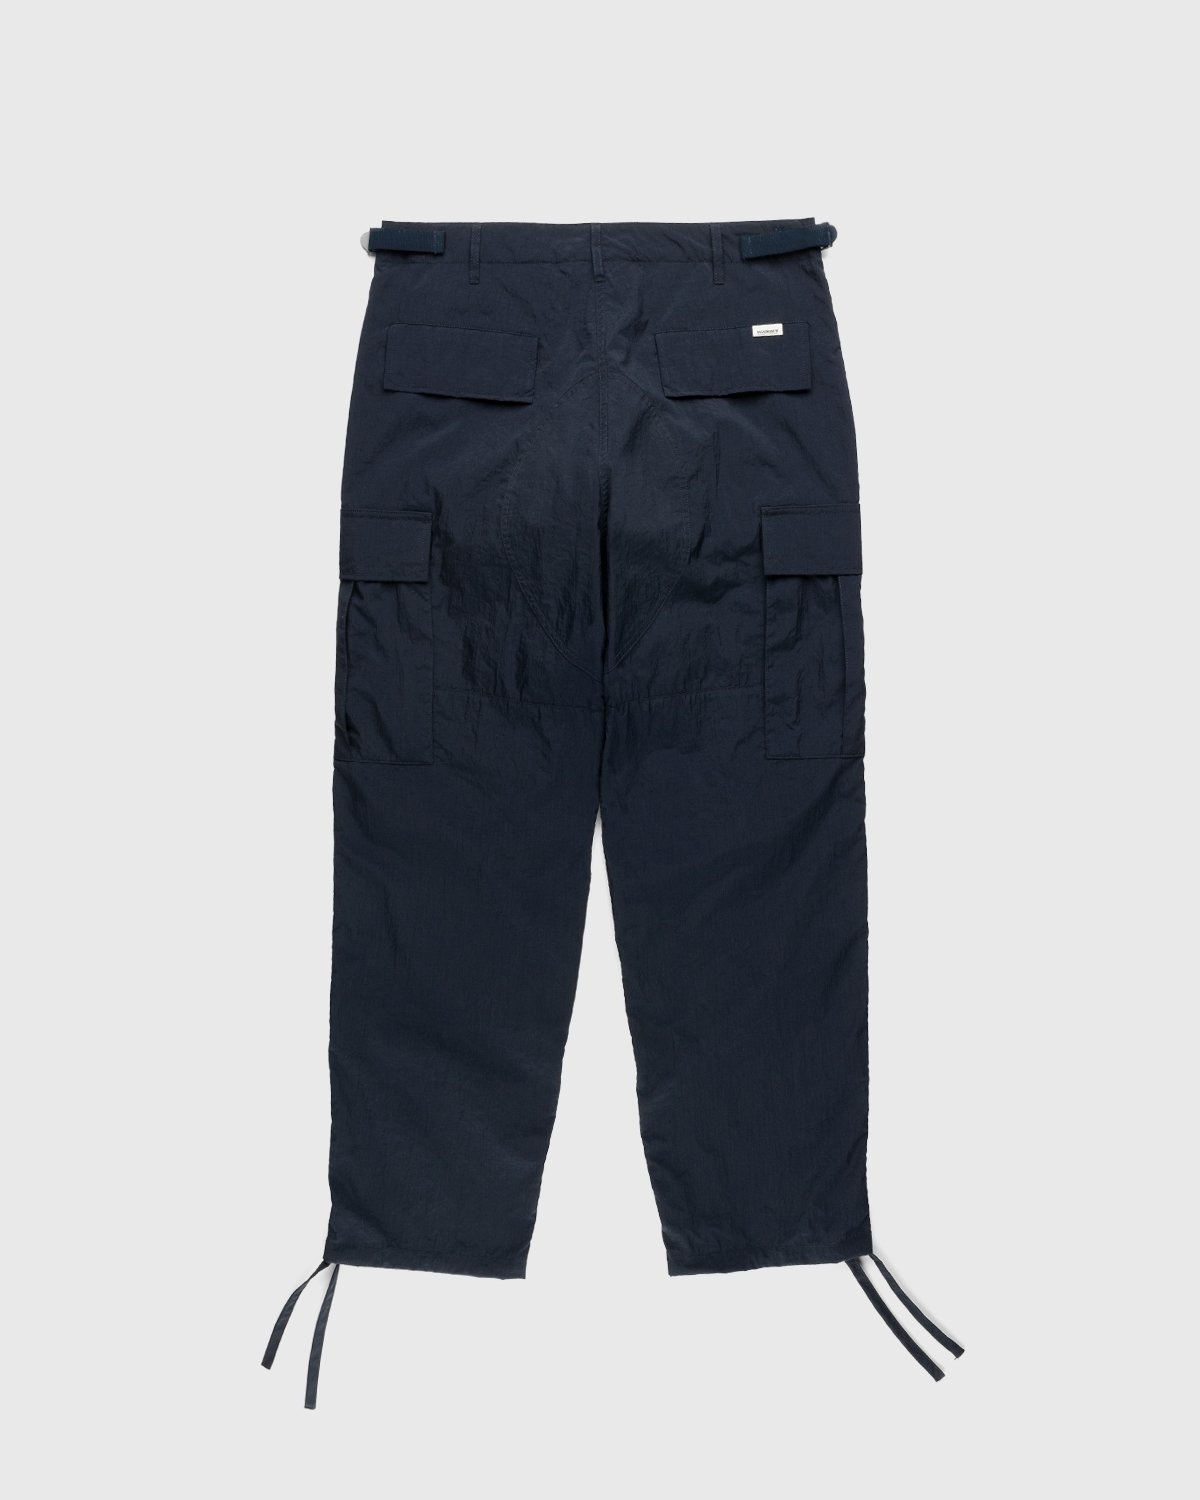 Highsnobiety – Water-Resistant Ripstop Cargo Pants Blue - Pants - Blue - Image 2